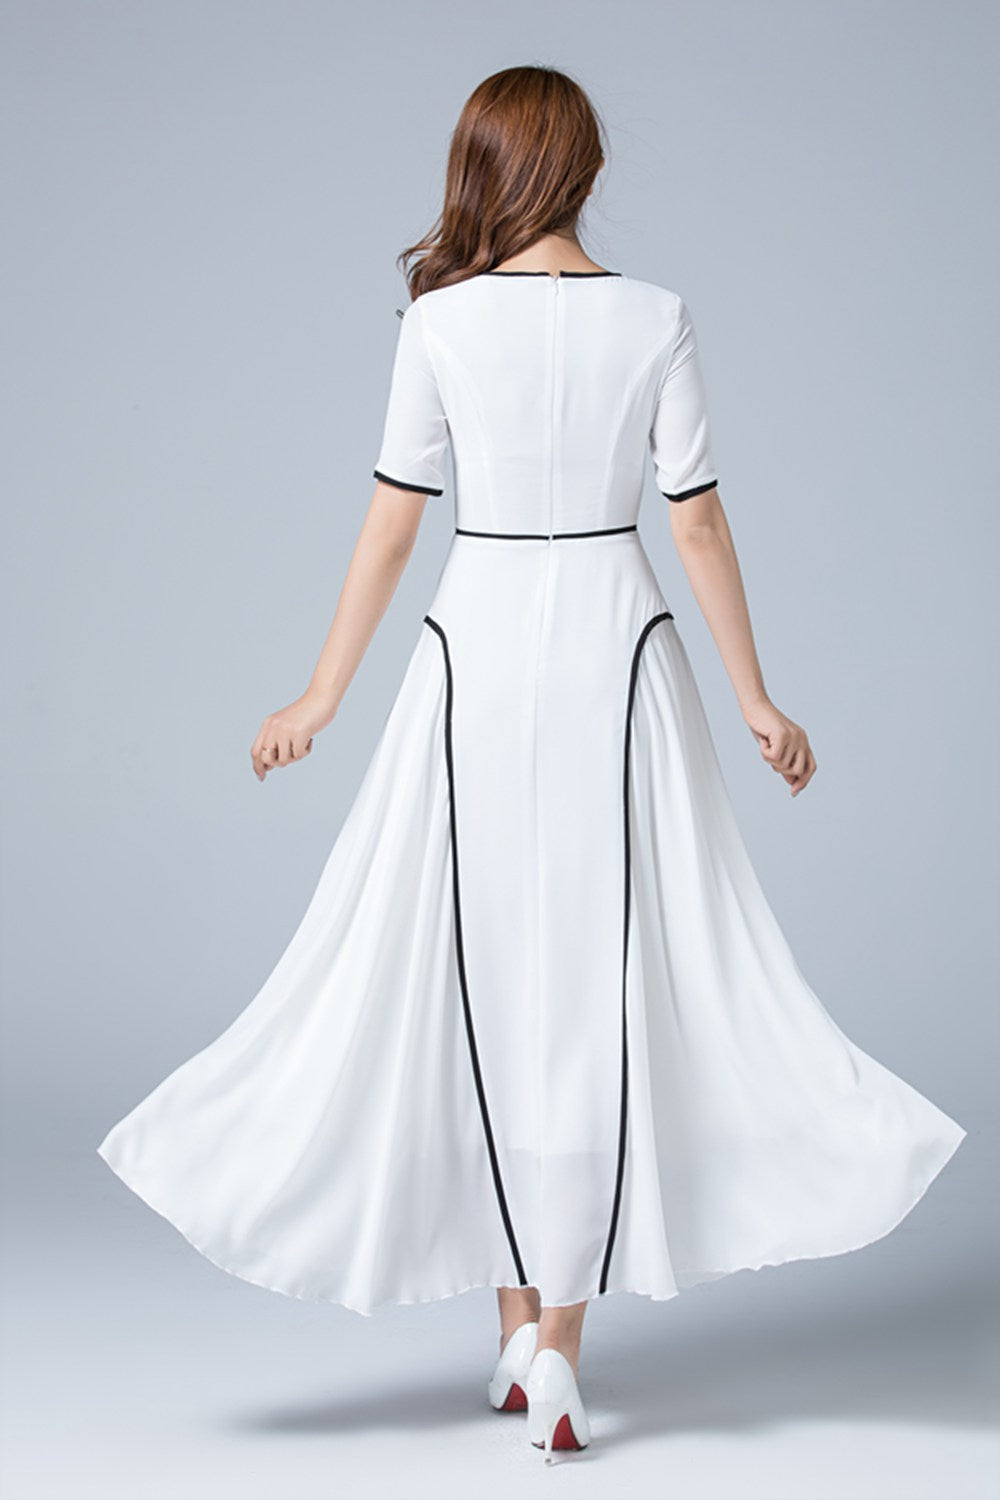 ankle length elegant dress with crew and high waist 1779